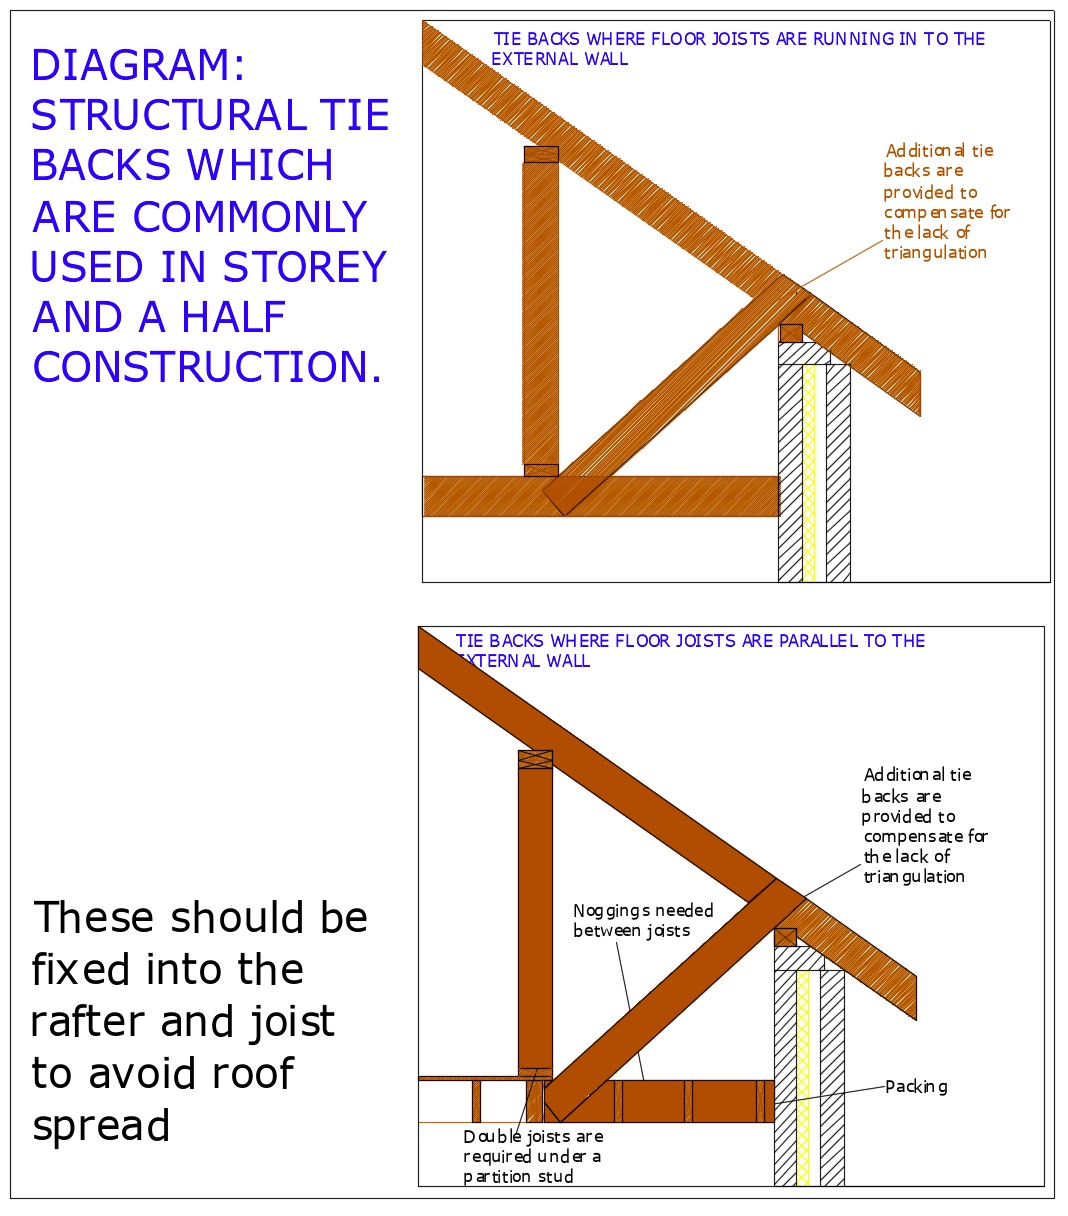 Diagram D51 - Additional tie back storey and a half